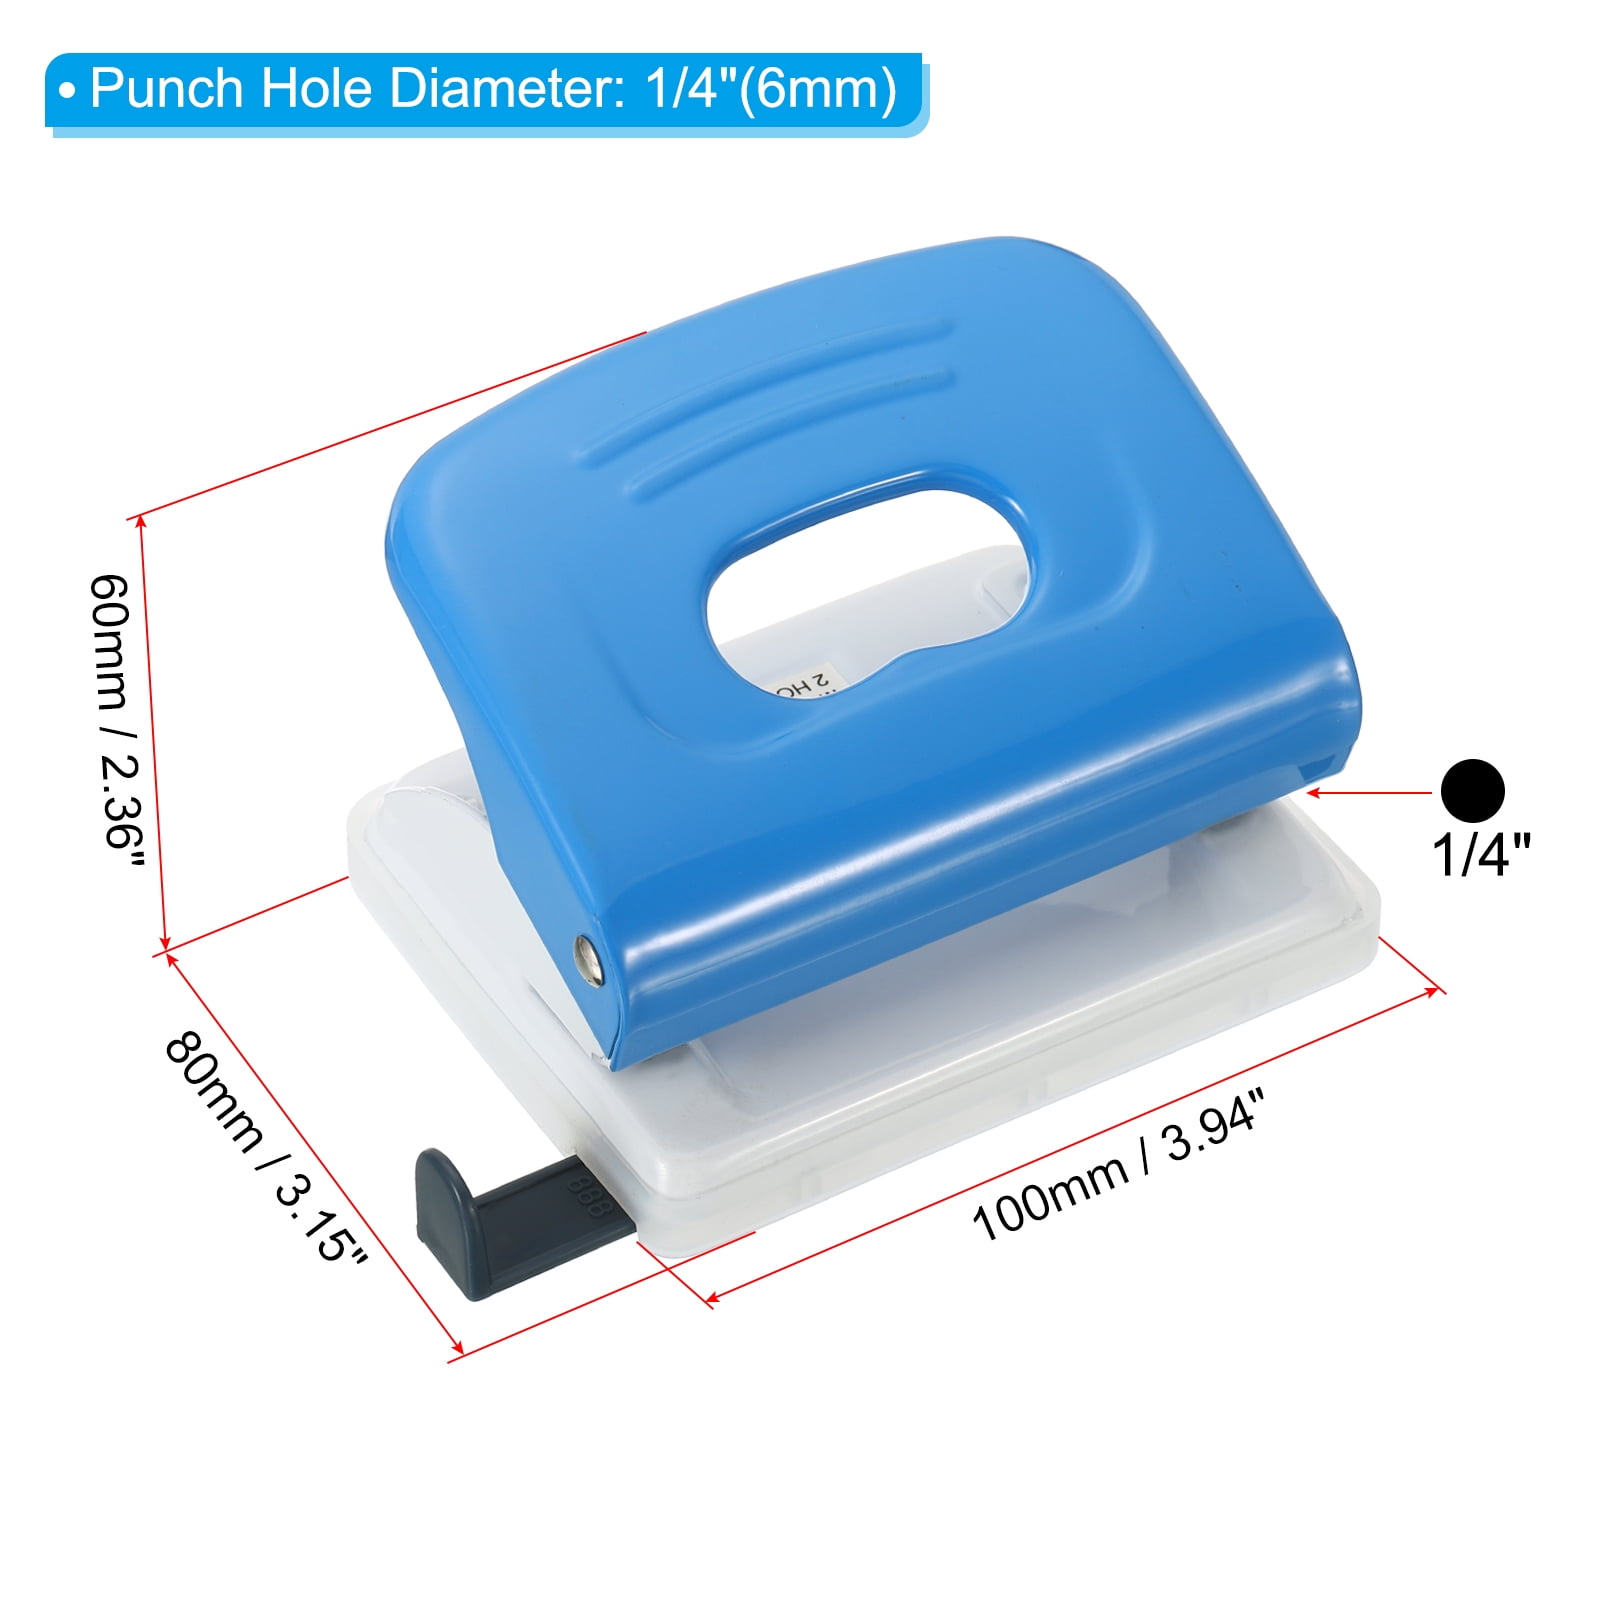 Uxcell 1/4 2 Hole Paper Punch Metal Hole Puncher 10 Sheet Punch Capacity  Adjustable Hole Punch, Blue